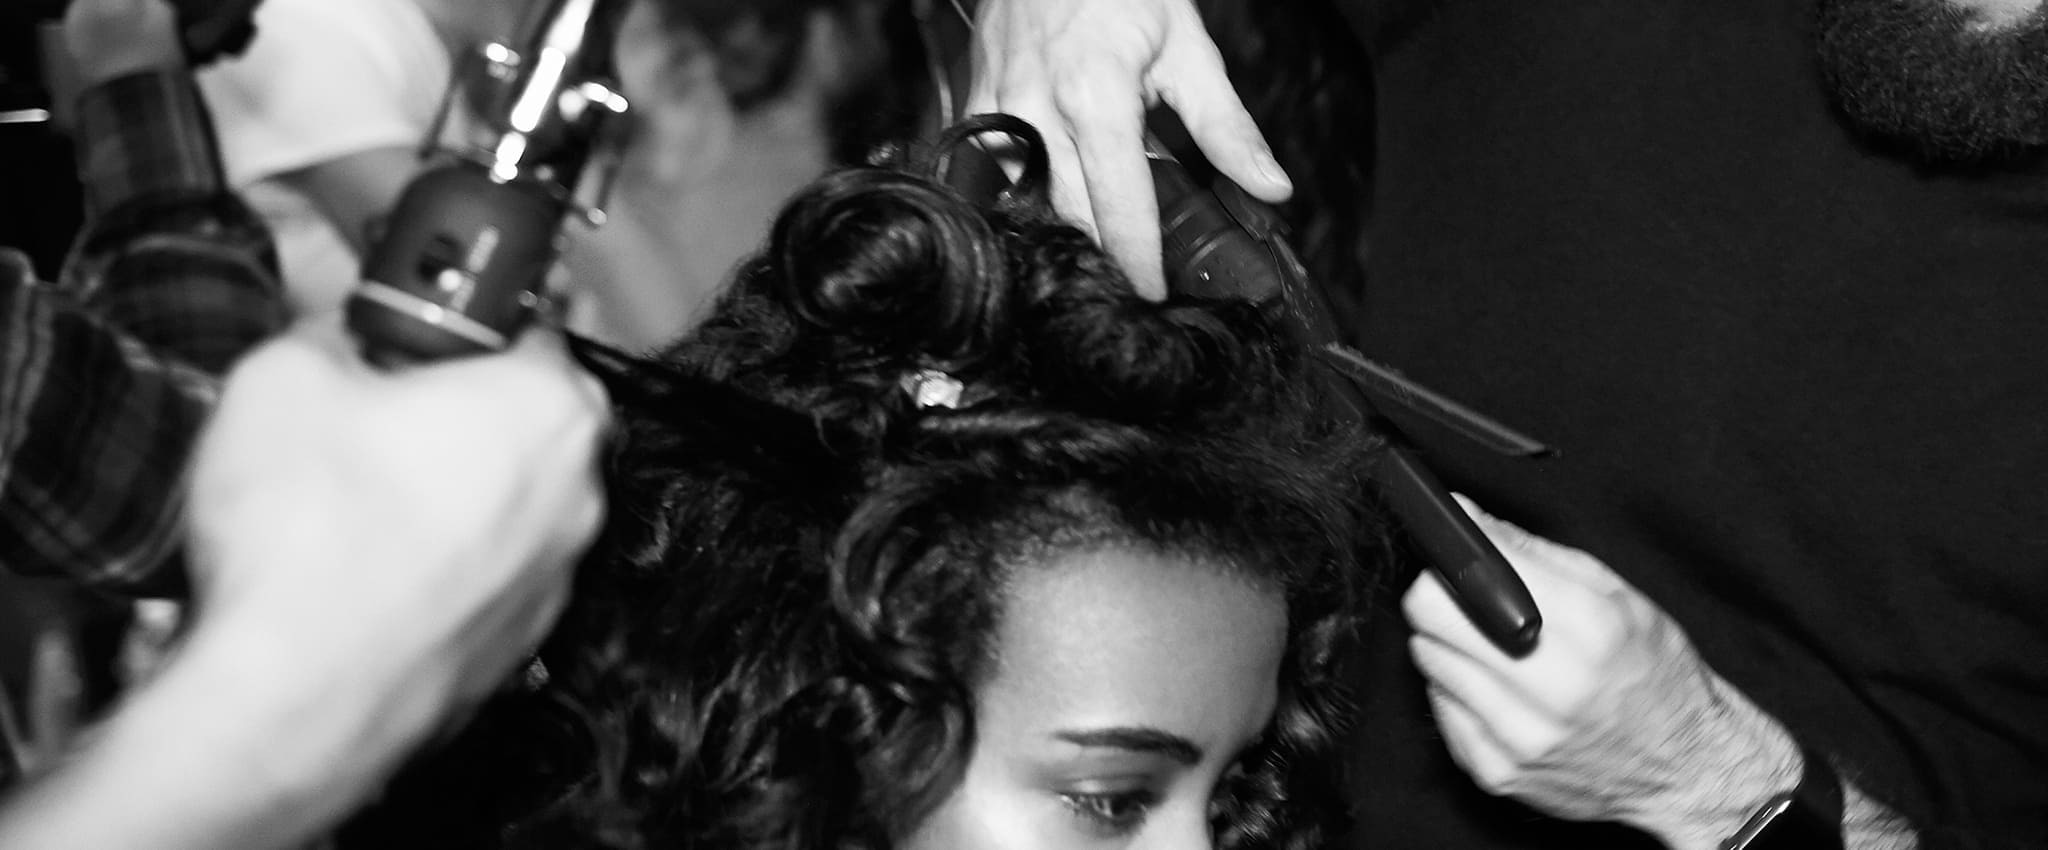 A model has her curly hair worked on by two stylists using heat tongs and other styling tools